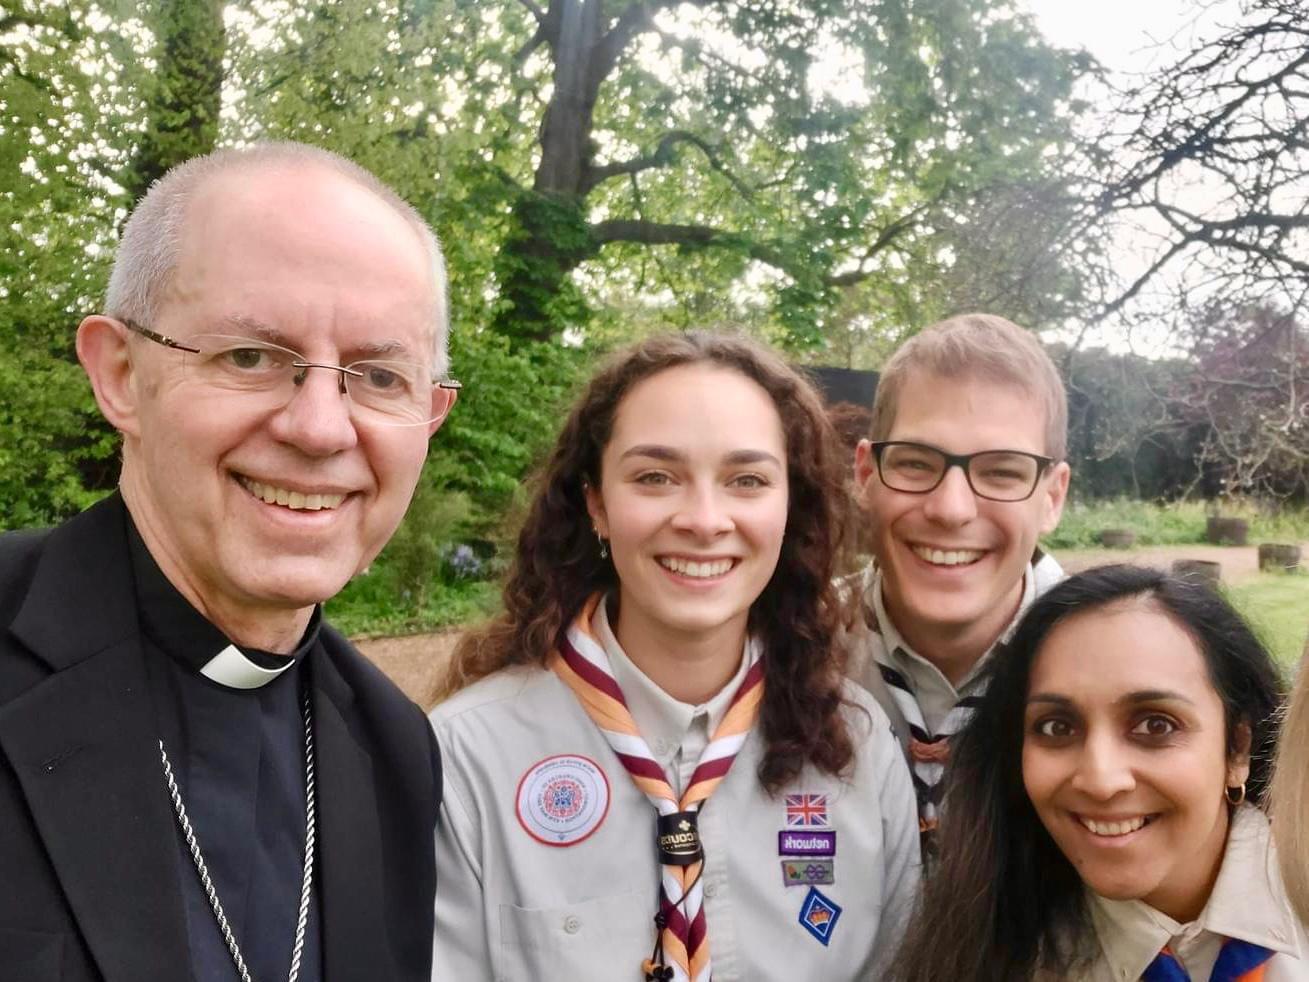 Three Scouts smiling with The Archbishop of Canterbury, Justin Welby